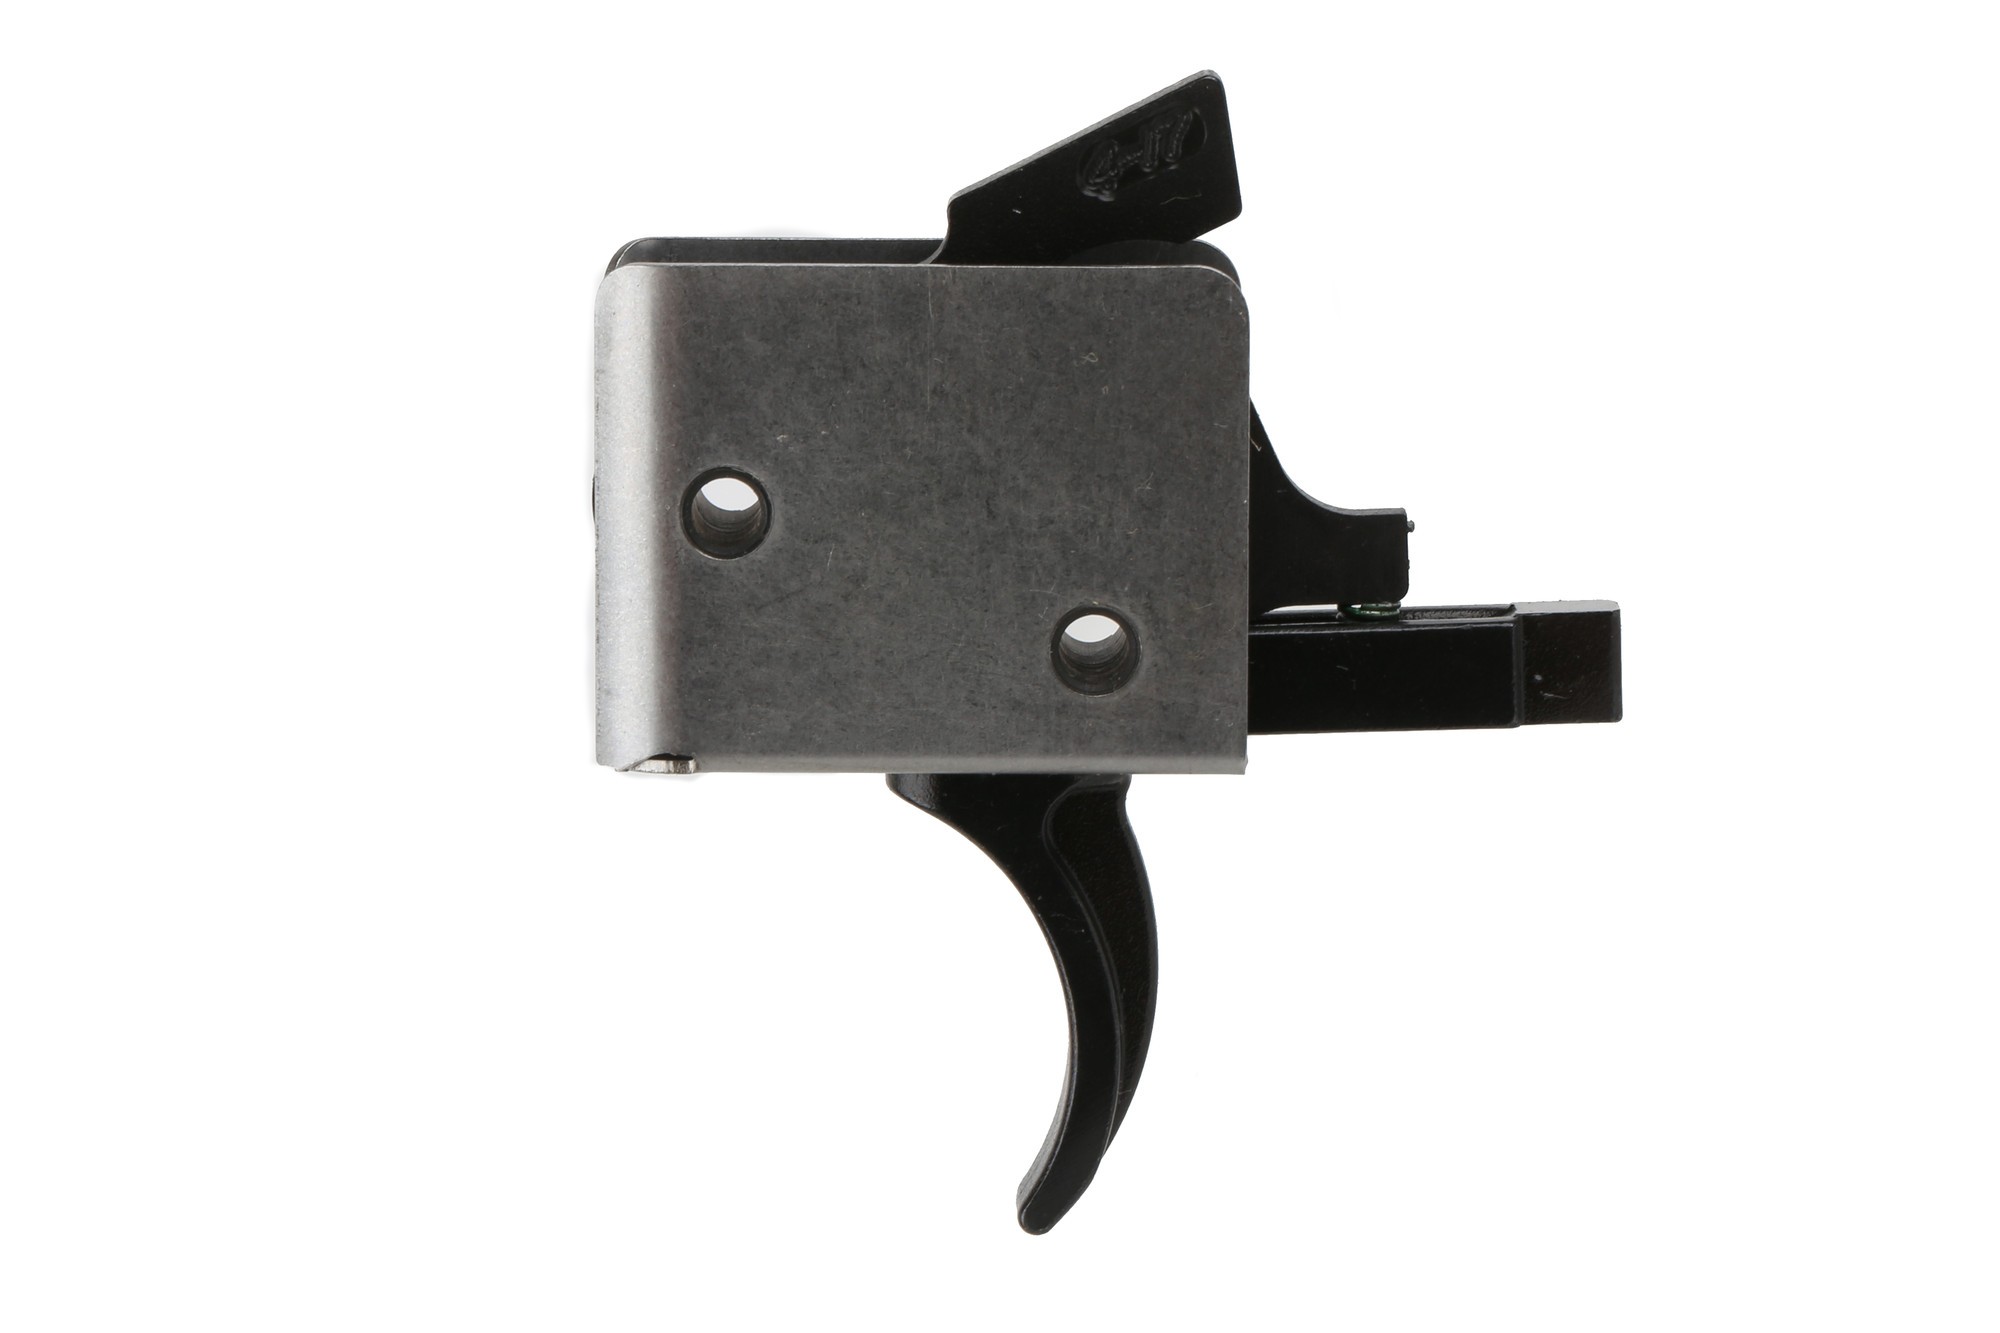 CMC AR Duty Patrol Single Stage Curved Trigger, 4.5-5lb, Drop in-92501